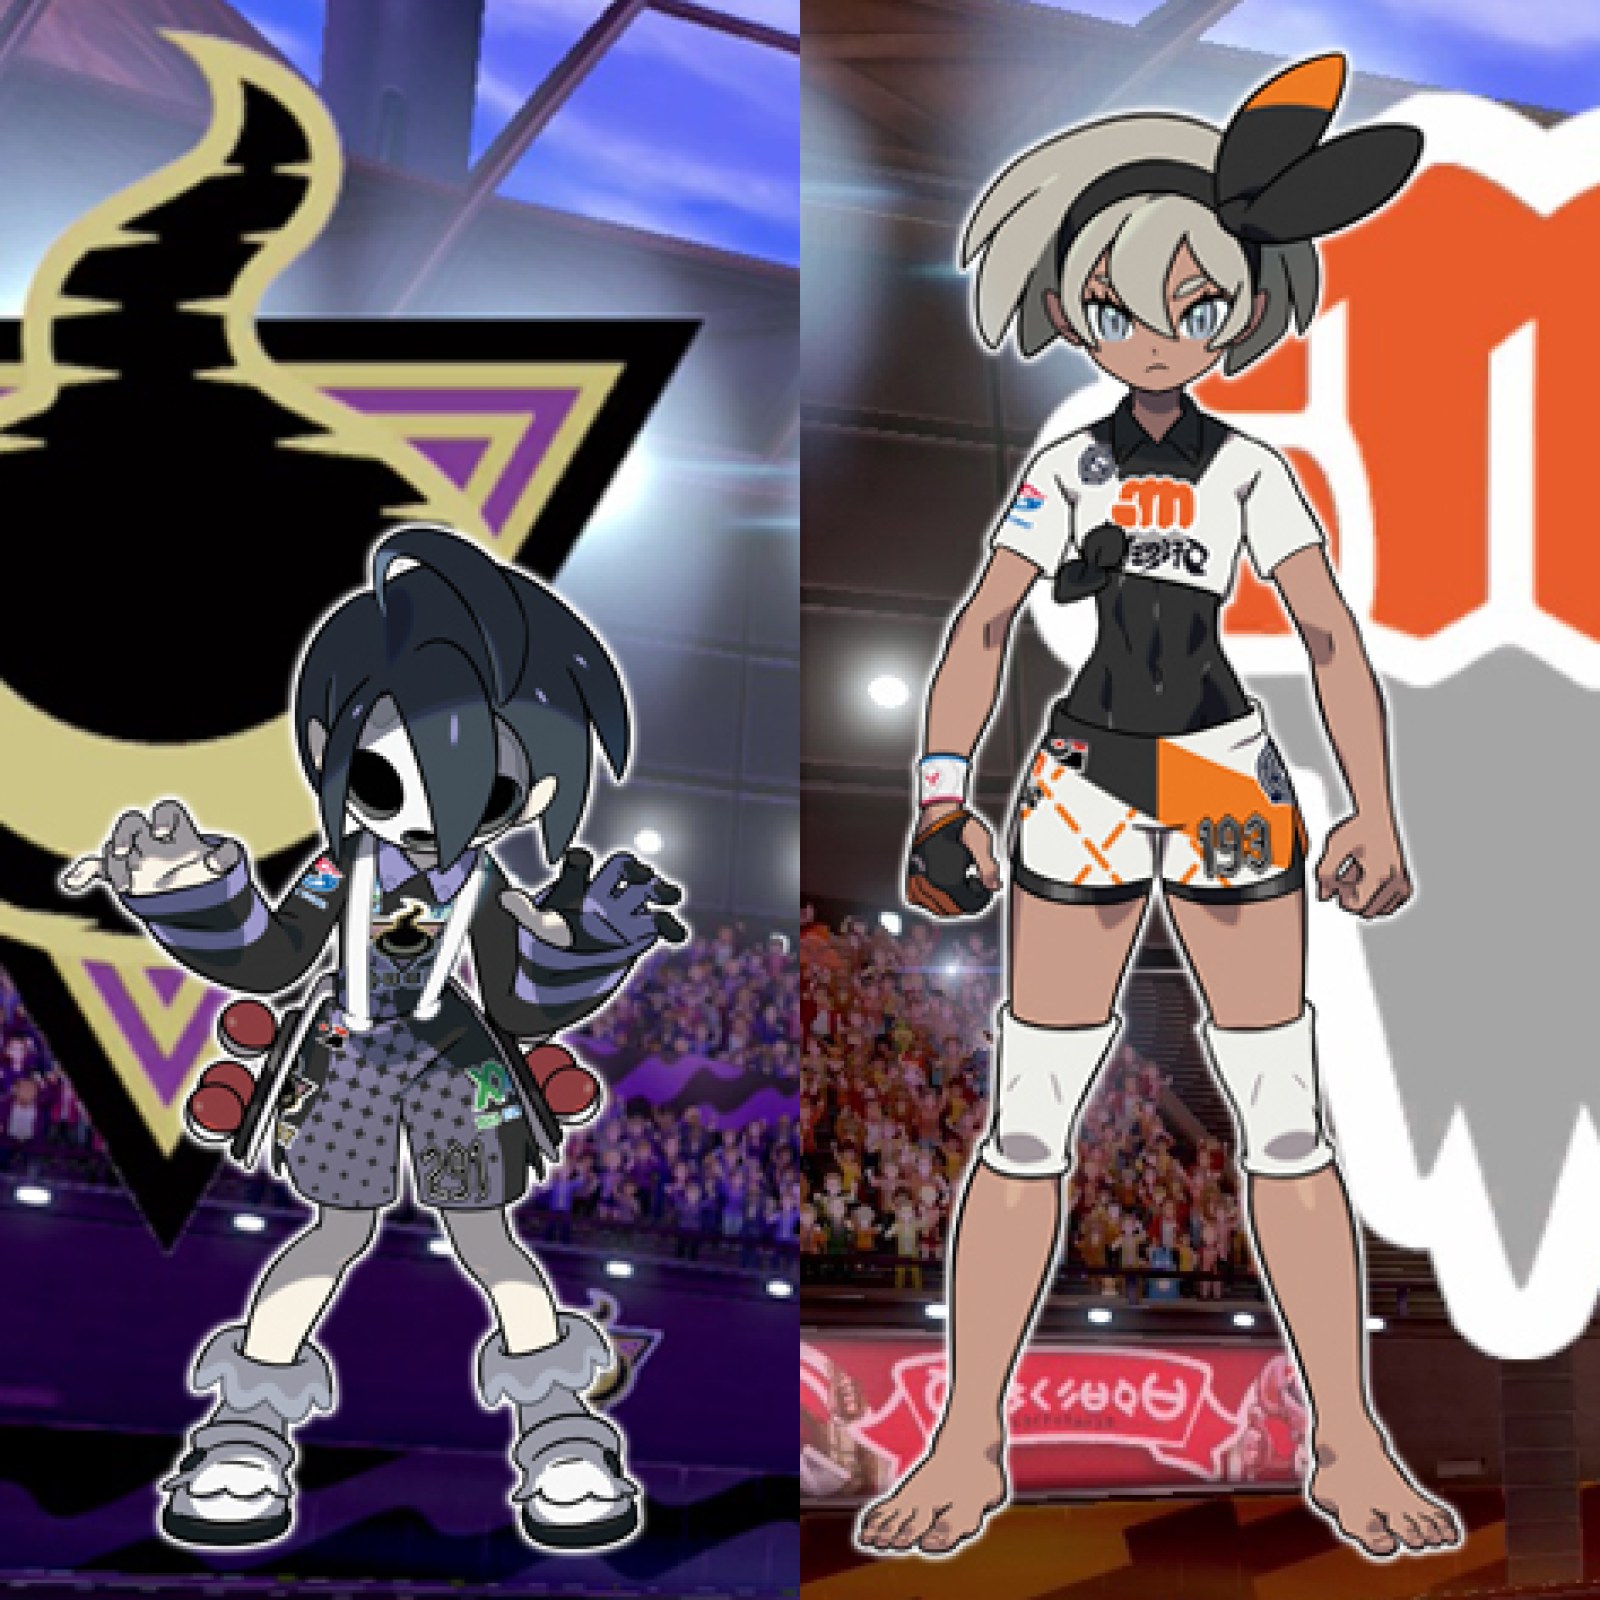 Pokemon Sword and Shield Features Version-exclusive Gym Leaders